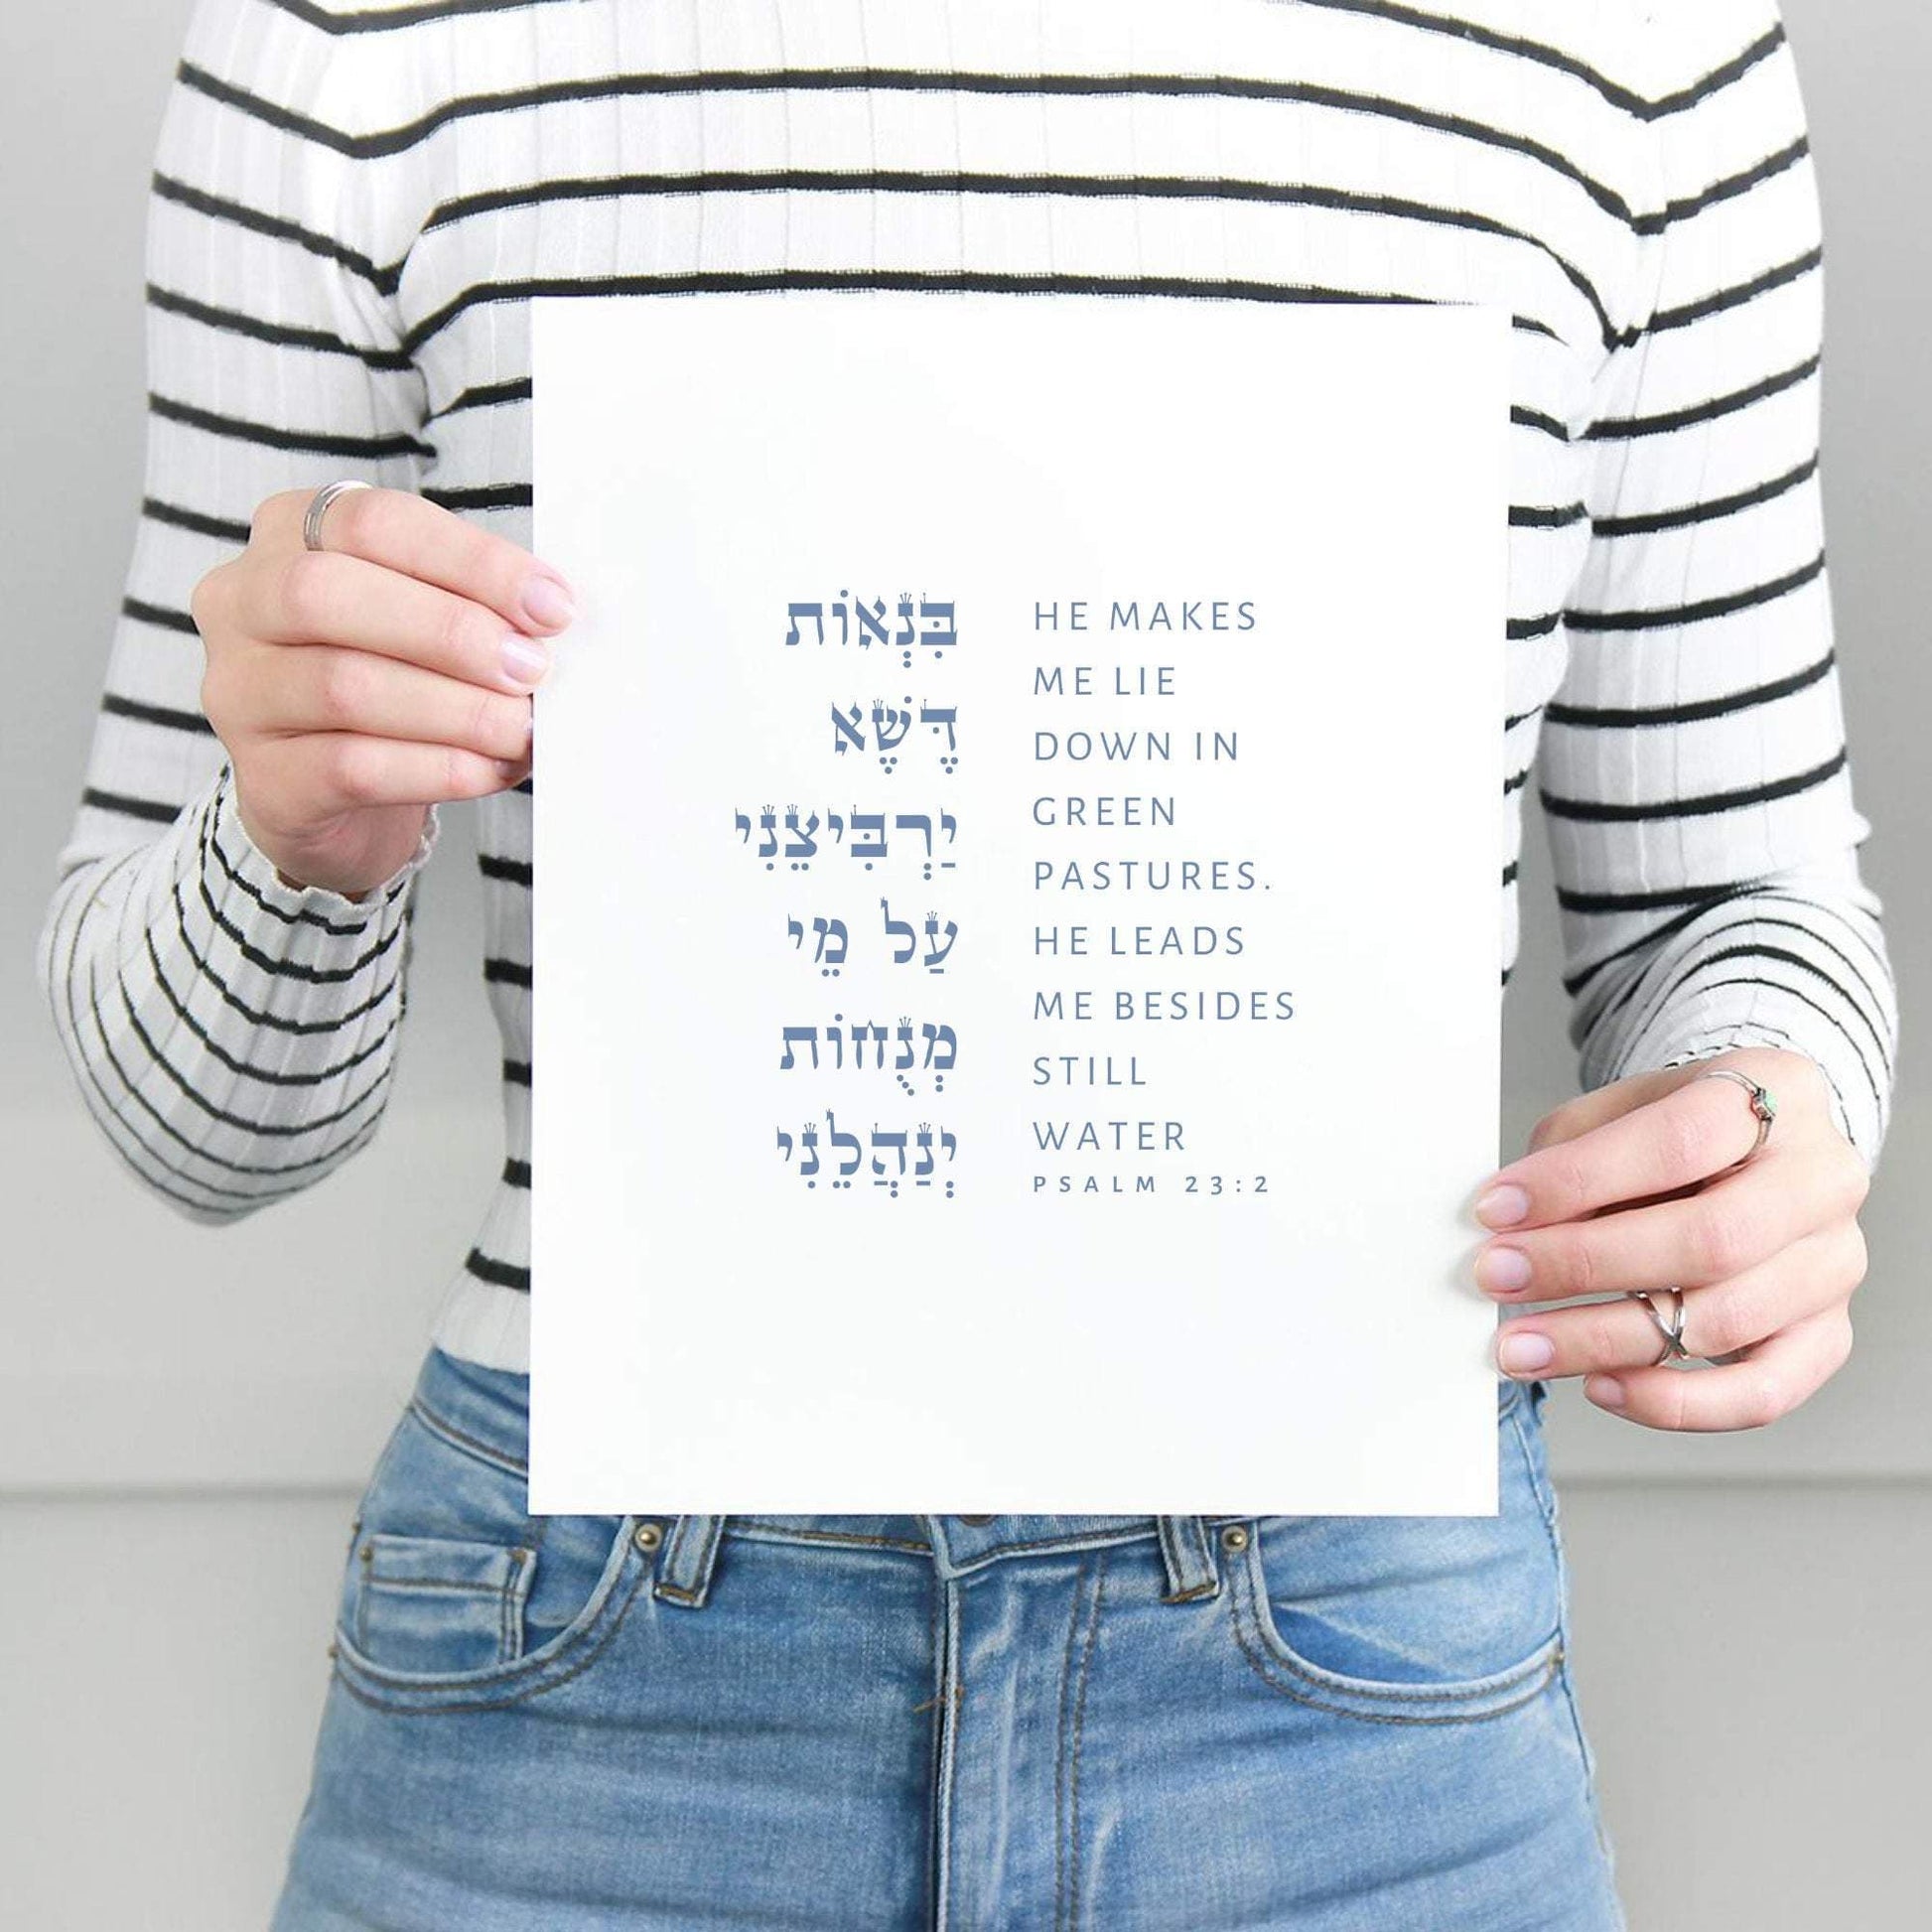 The Verse Psalm 23:2 "He leads me besides still water" Psalm 23:2 | Jewish Psalms Prints | He leads me beside still waters